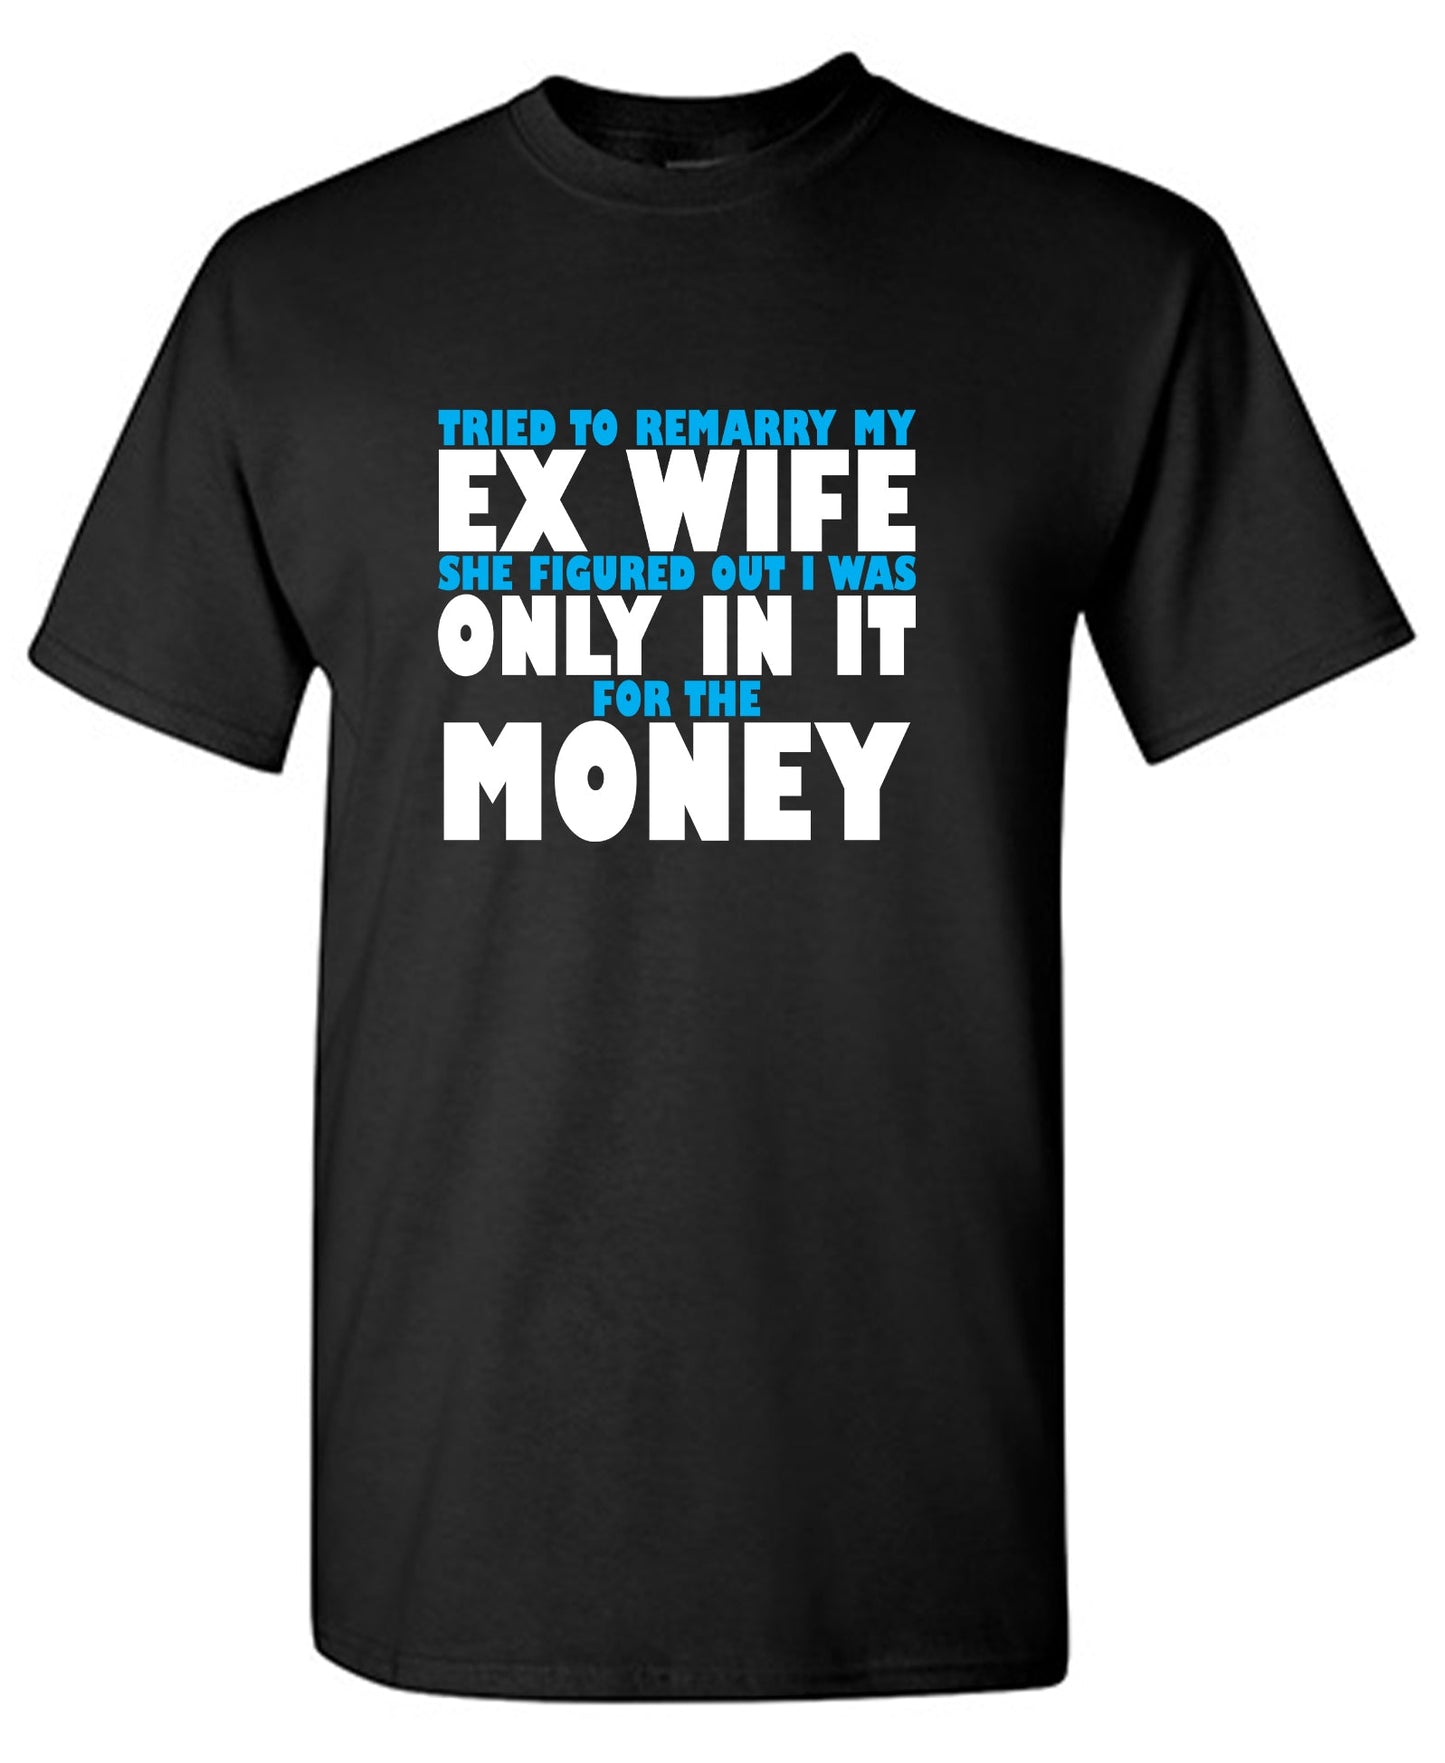 Tried to Remarry my Ex-Wfe, She Figured Out I was Only in it for the Money